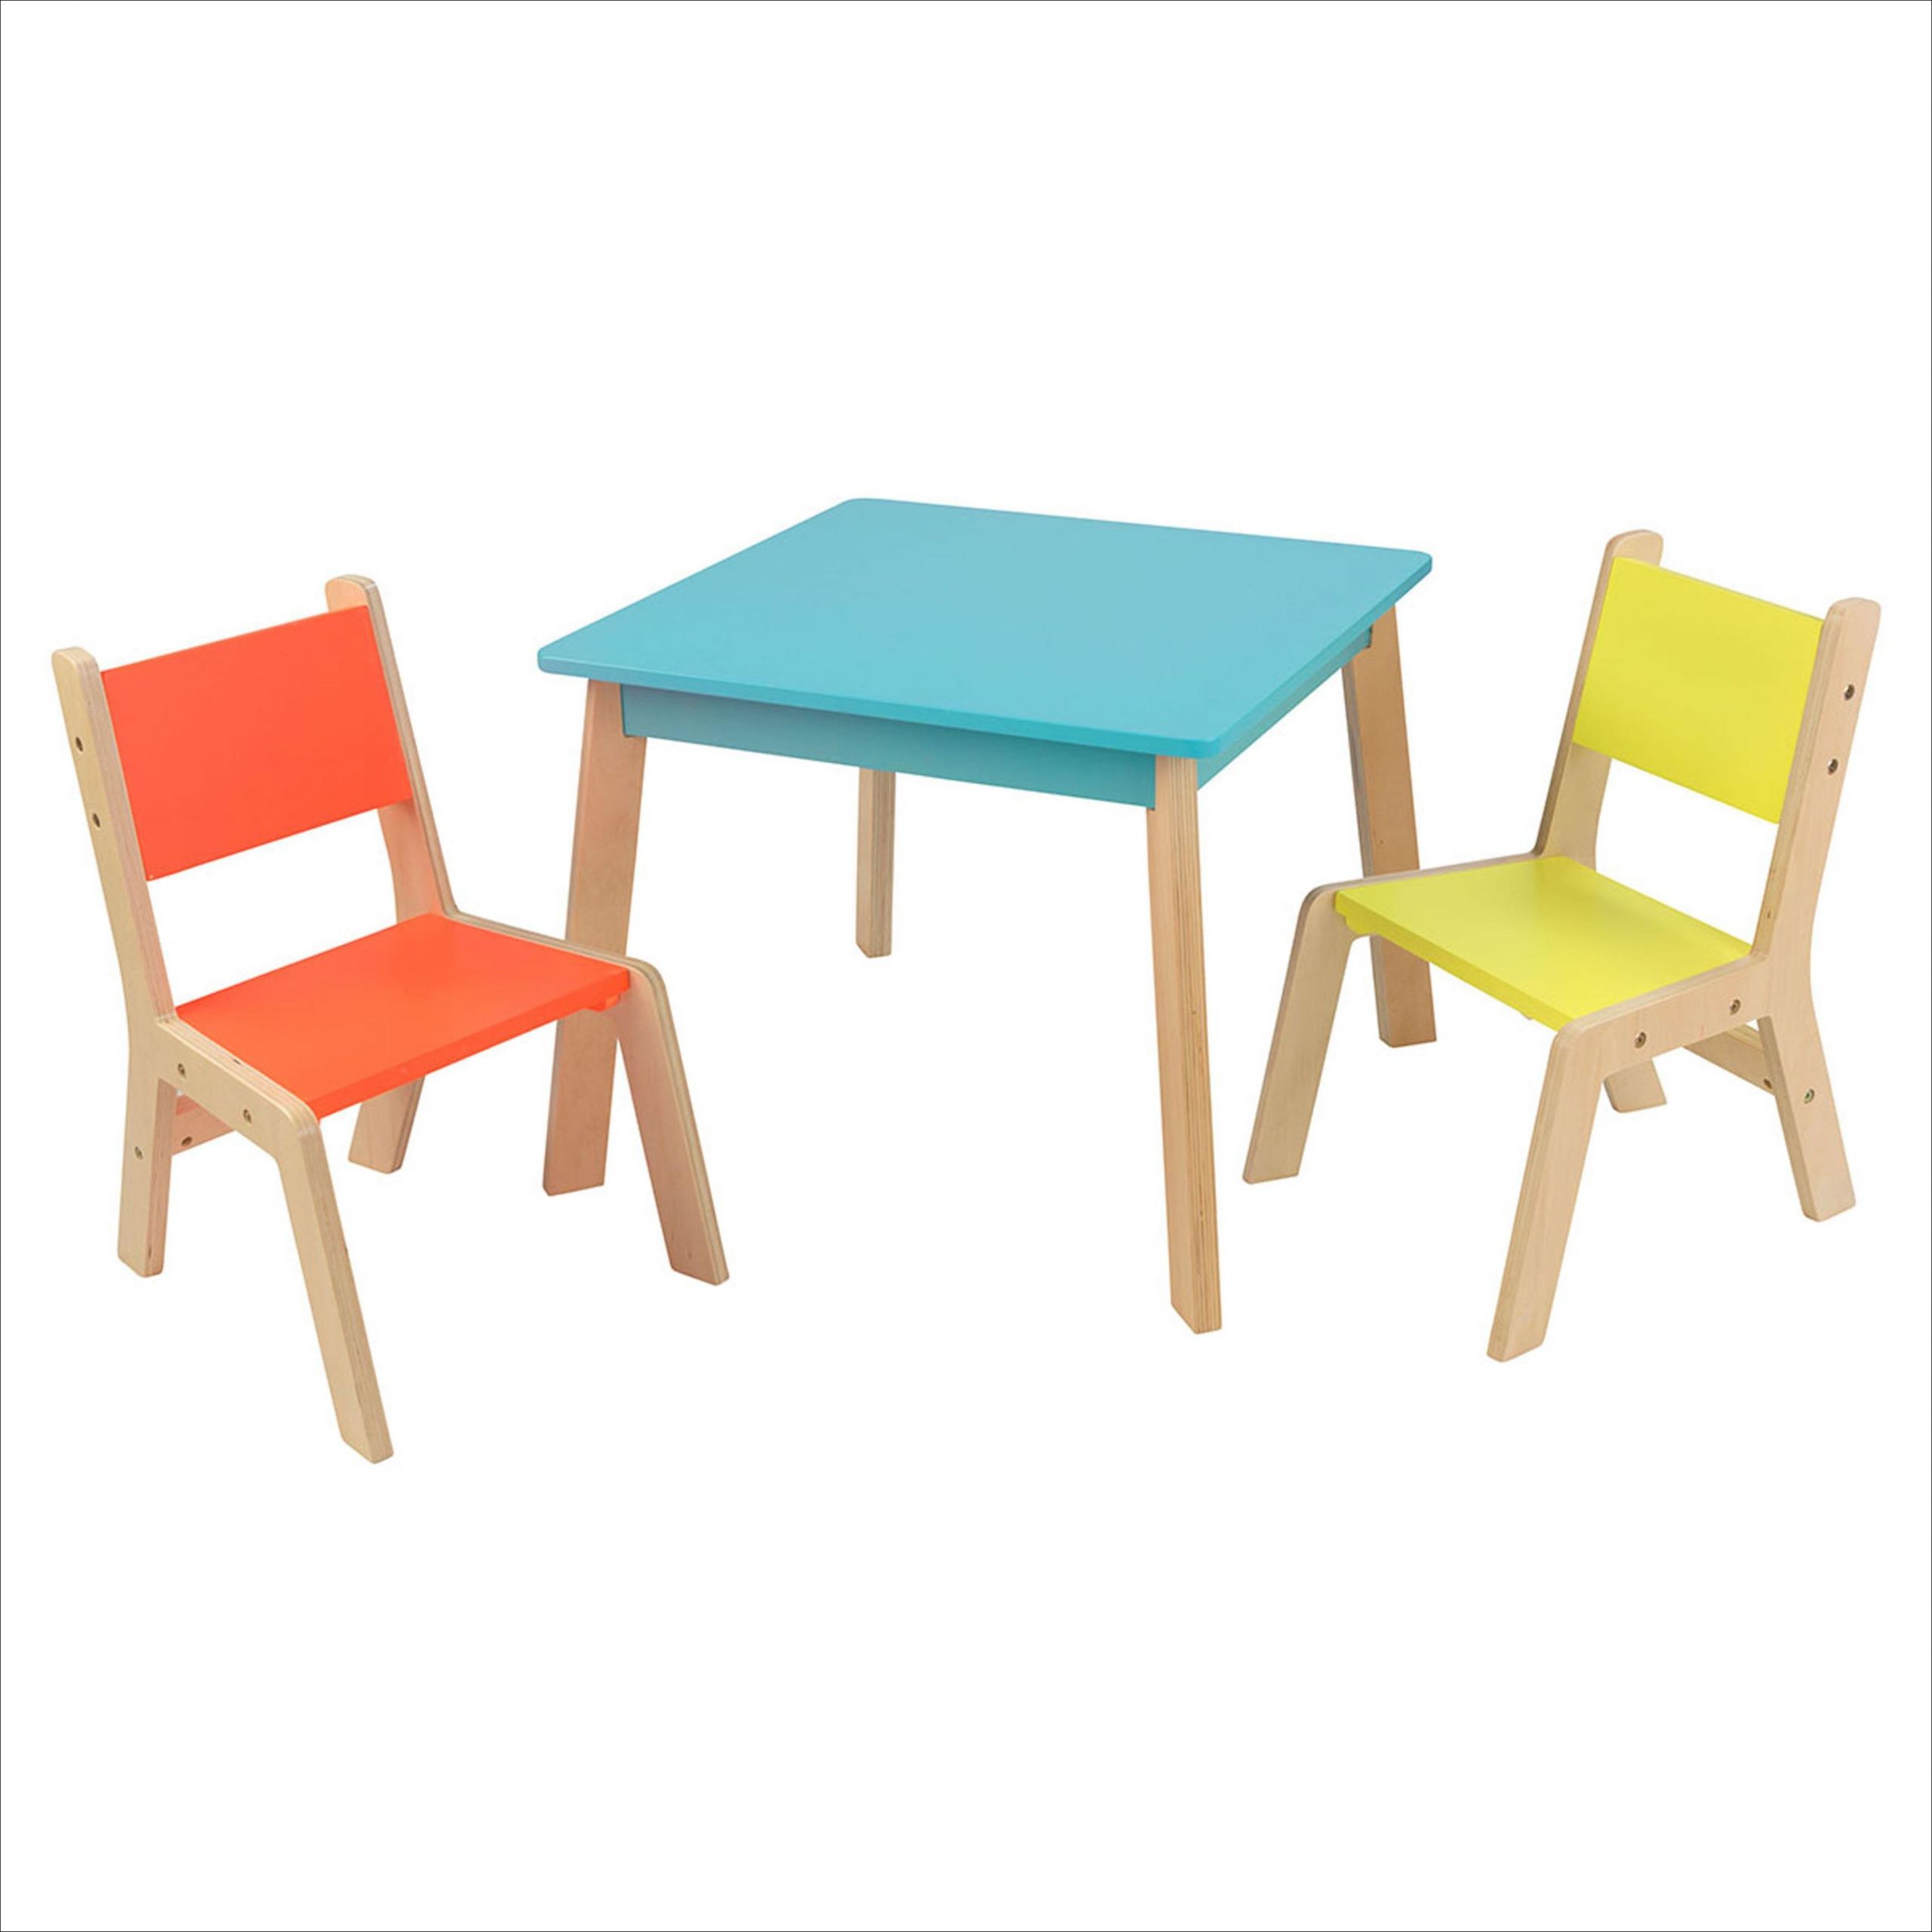 Kids Table And Chairs Walmart
 Walmart Table And Chairs For Kids HomeCoach